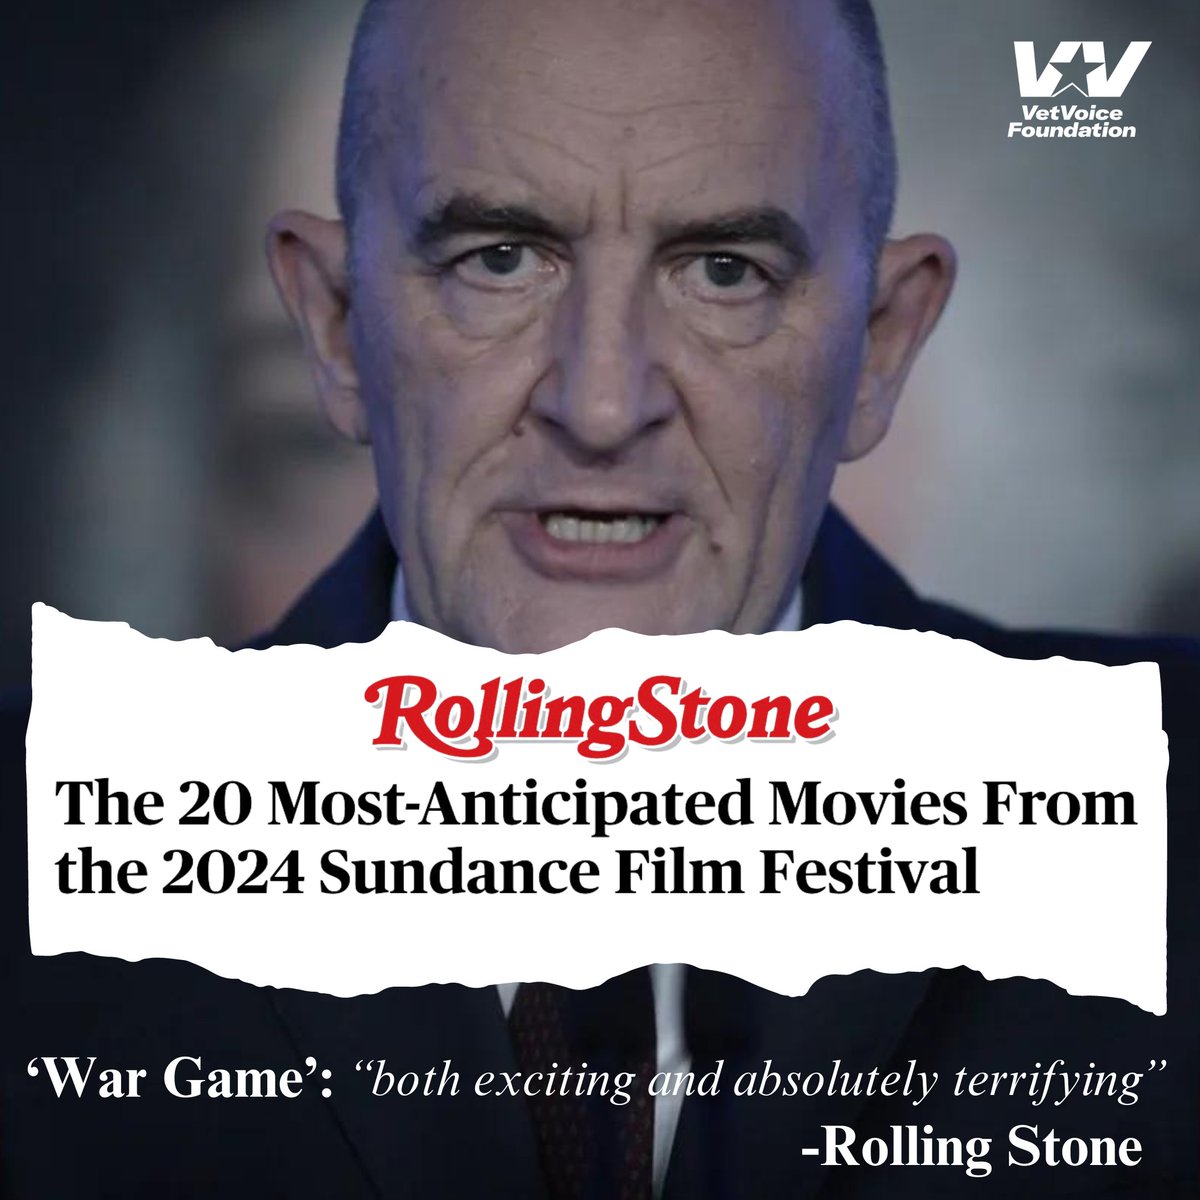 The documentary, 'War Game,' featuring our work, has been named one of the most-anticipated films from the 2024 Sundance Film Festival! 'Jesse Moss and Tony Gerber detail an actual what-if exercise conducted among Beltway insiders...' READ MORE: rollingstone.com/tv-movies/tv-m…